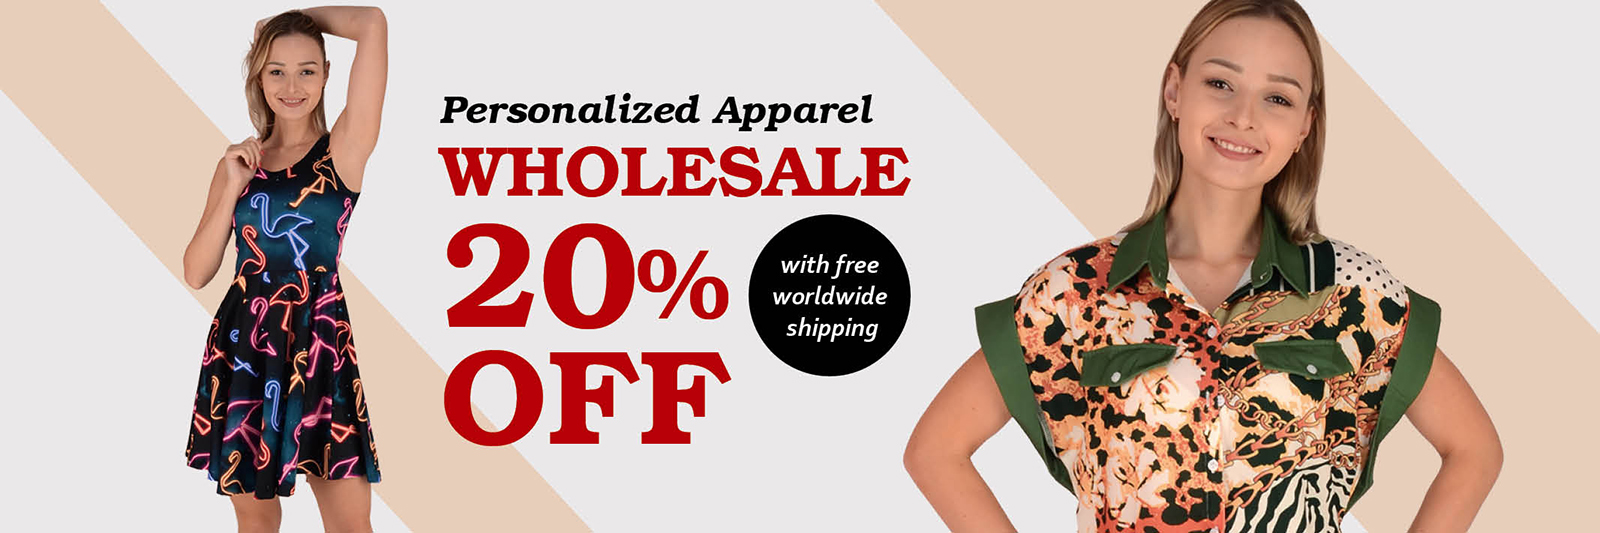 Personalized Apparel: Wholesale 20% Off ith Free Shipping